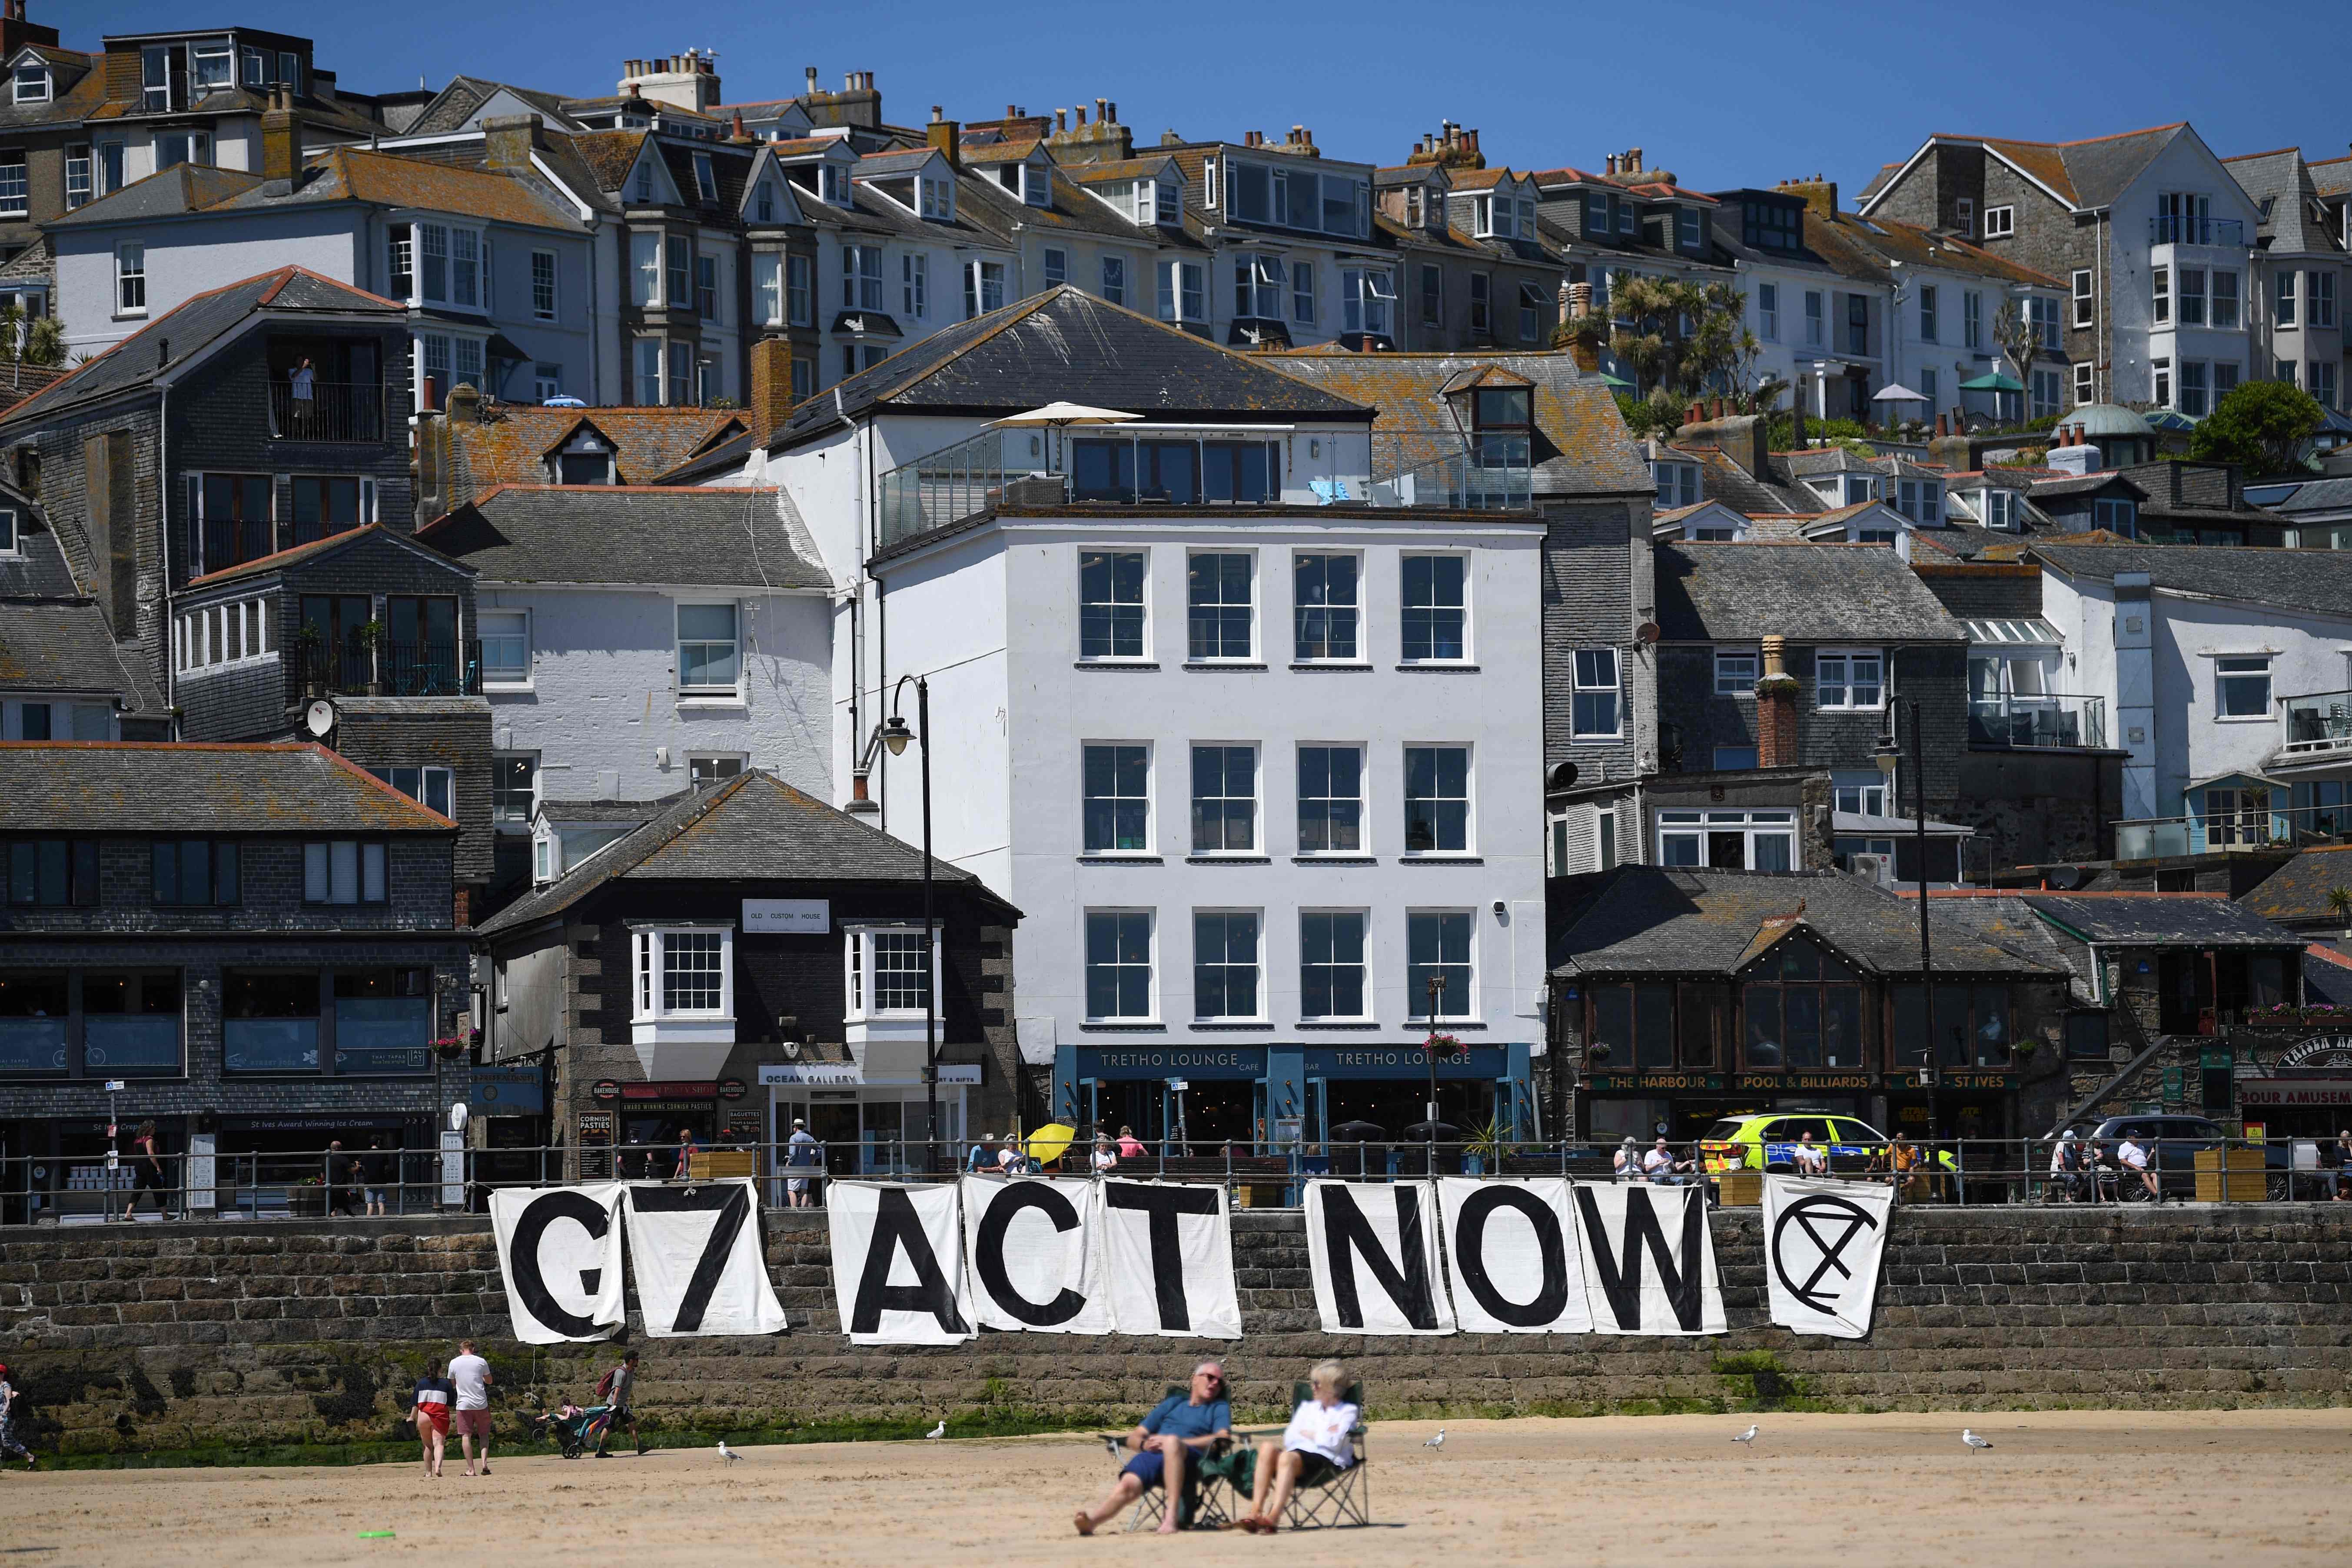 Extinction Rebellion environmental activists attach a banner calling on G7 leaders to act on climate change on the beach in St Ives, Cornwall during the G7 summit on June 13, 202